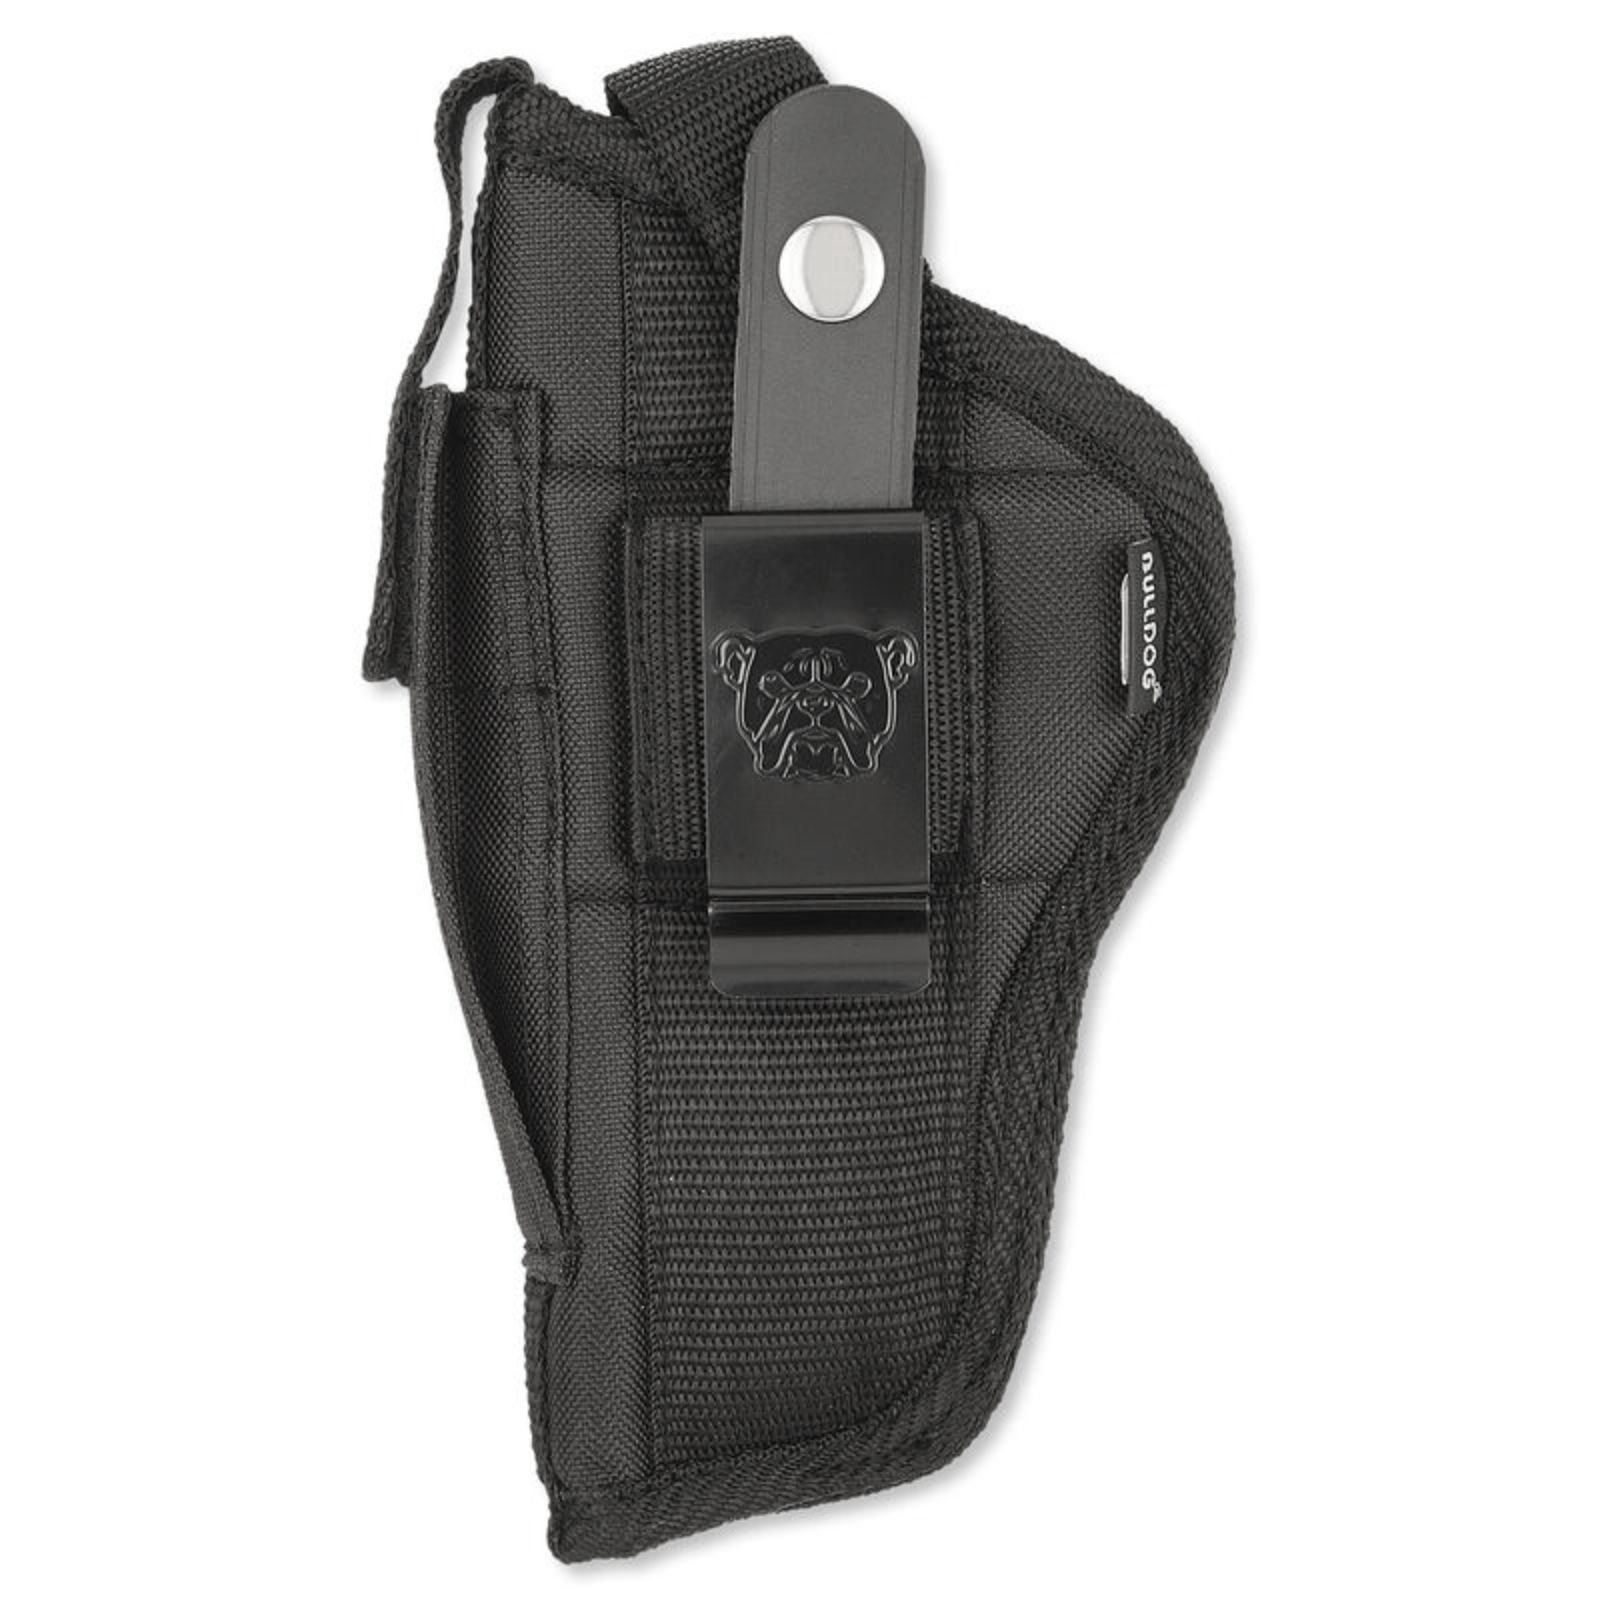 Bulldog Gun holster For Smith & Wesson 66,547,586,629 With 3" Barrel 6 SHOT 